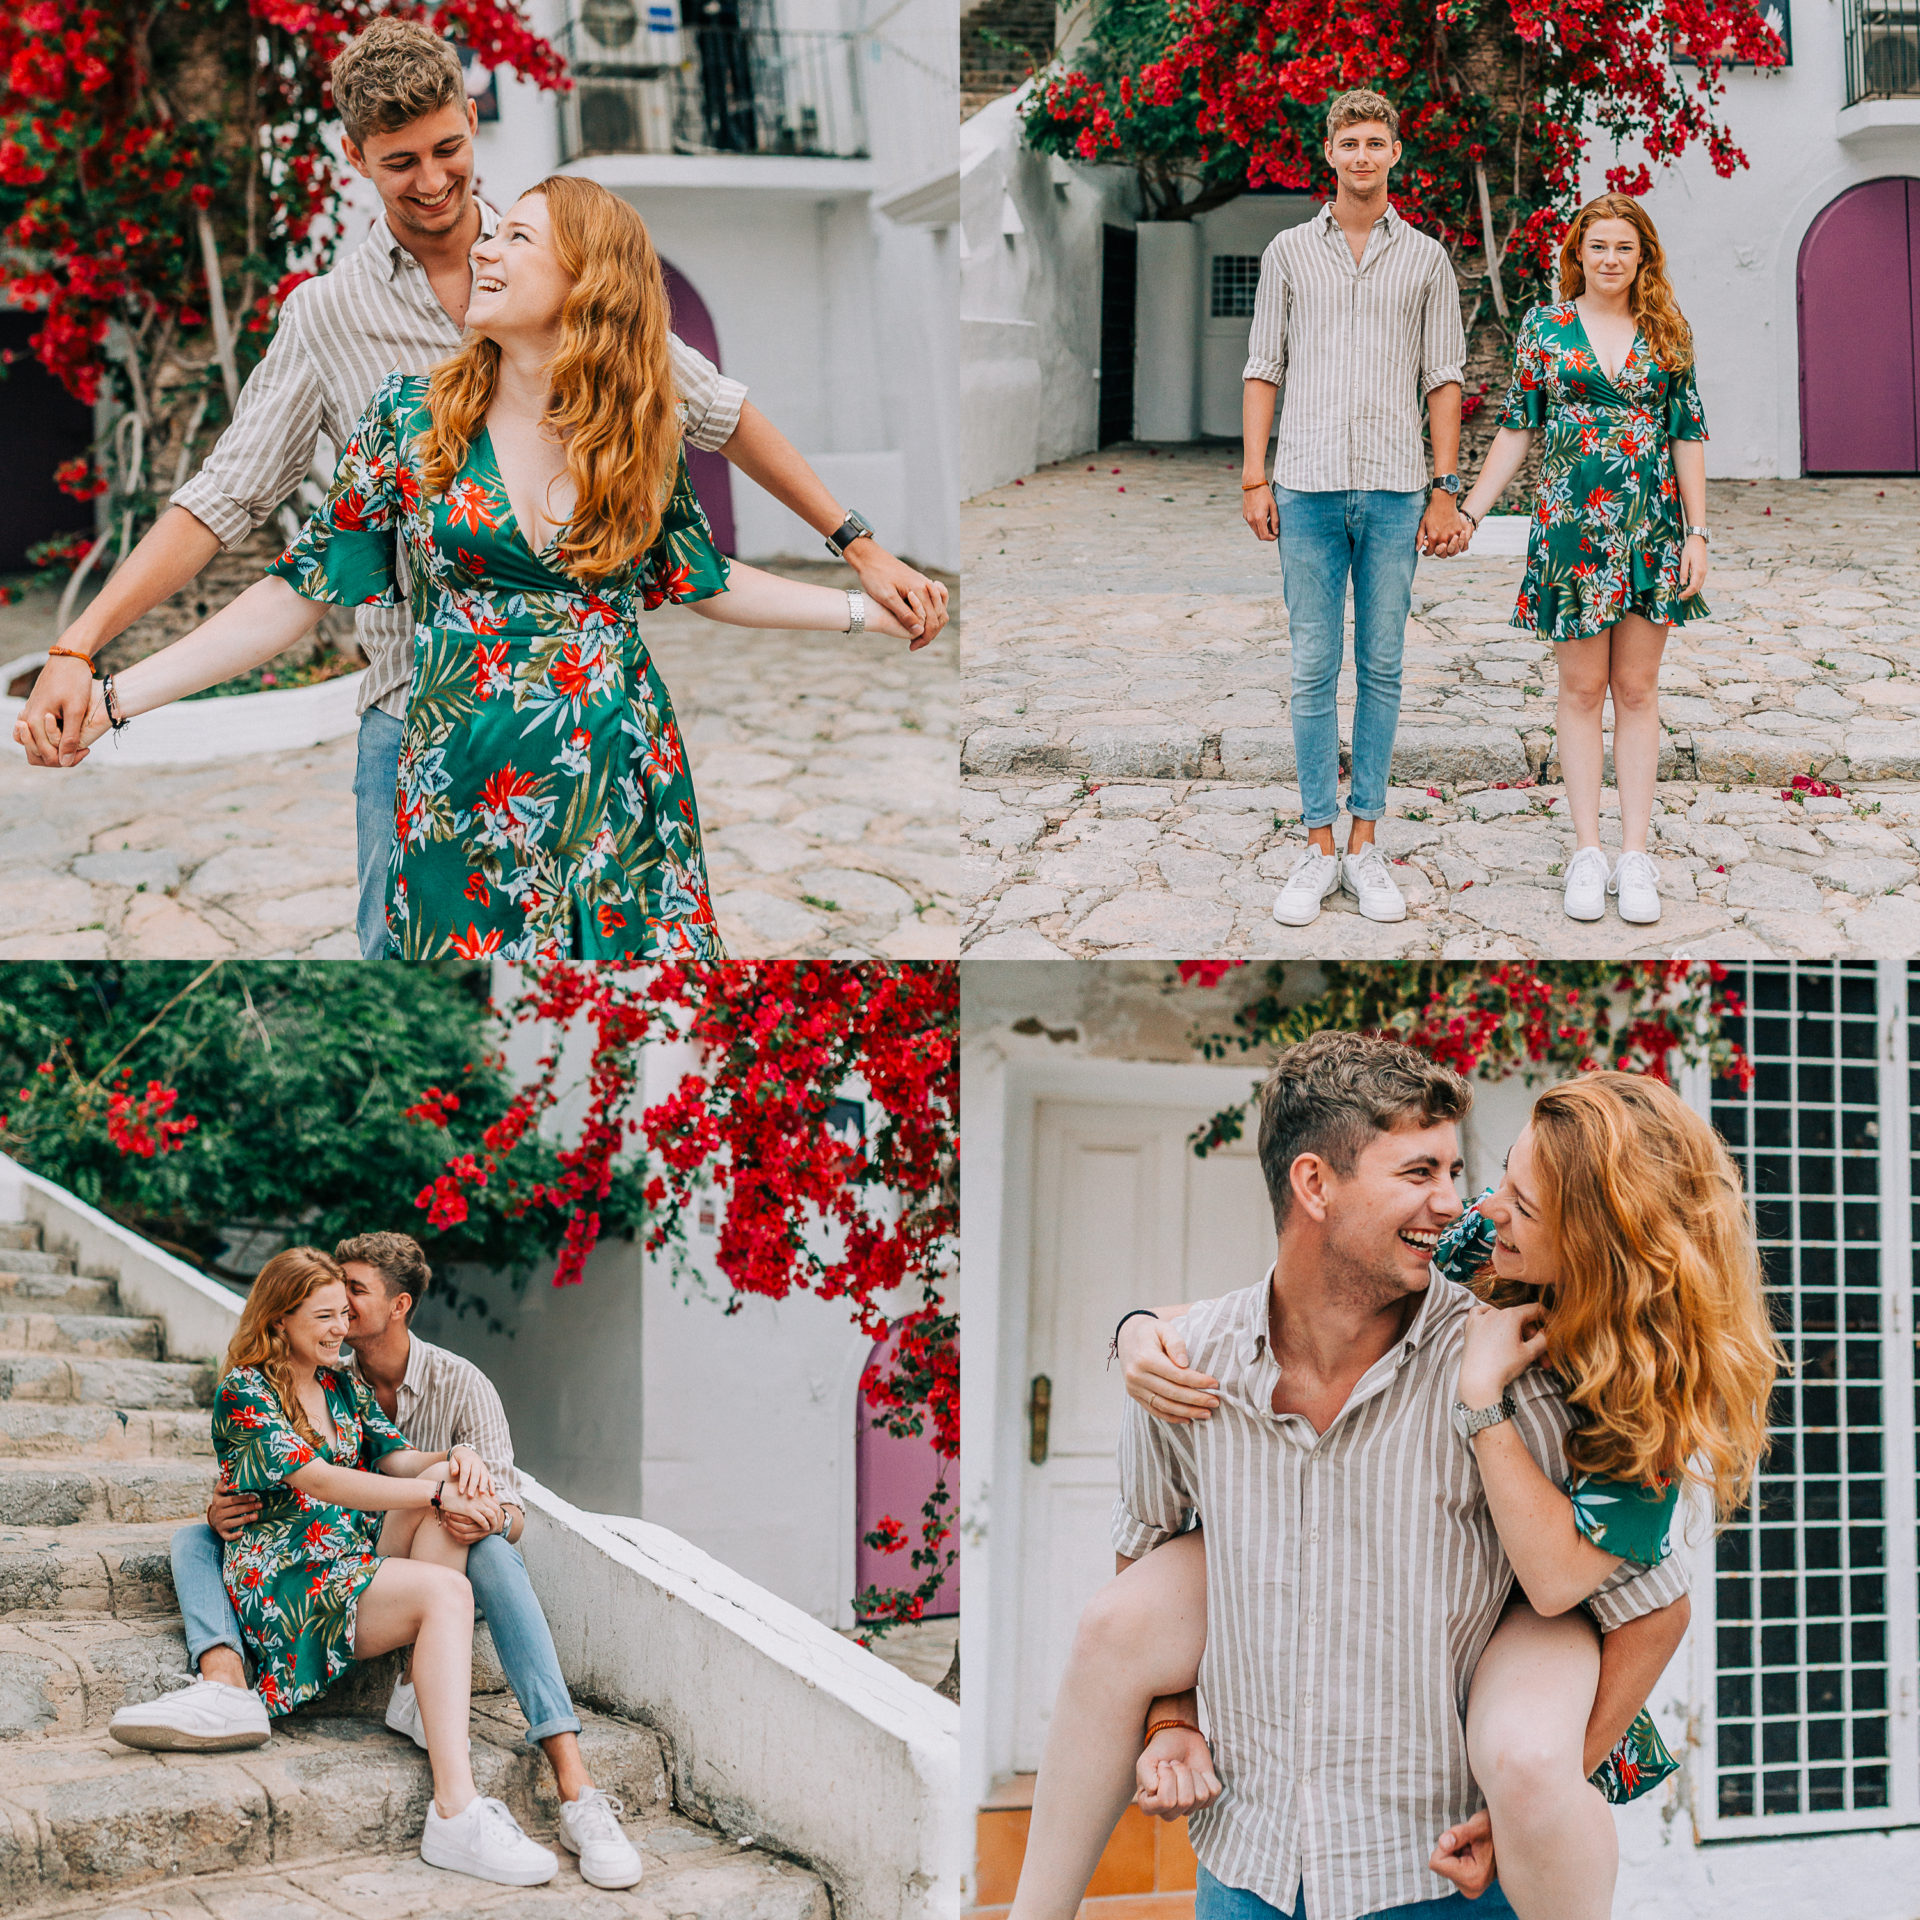 Martijn-Julia-Preview-1920x1920 Top Best Locations for Your Love Shoot (Updated in 2020) Engagement How-to 